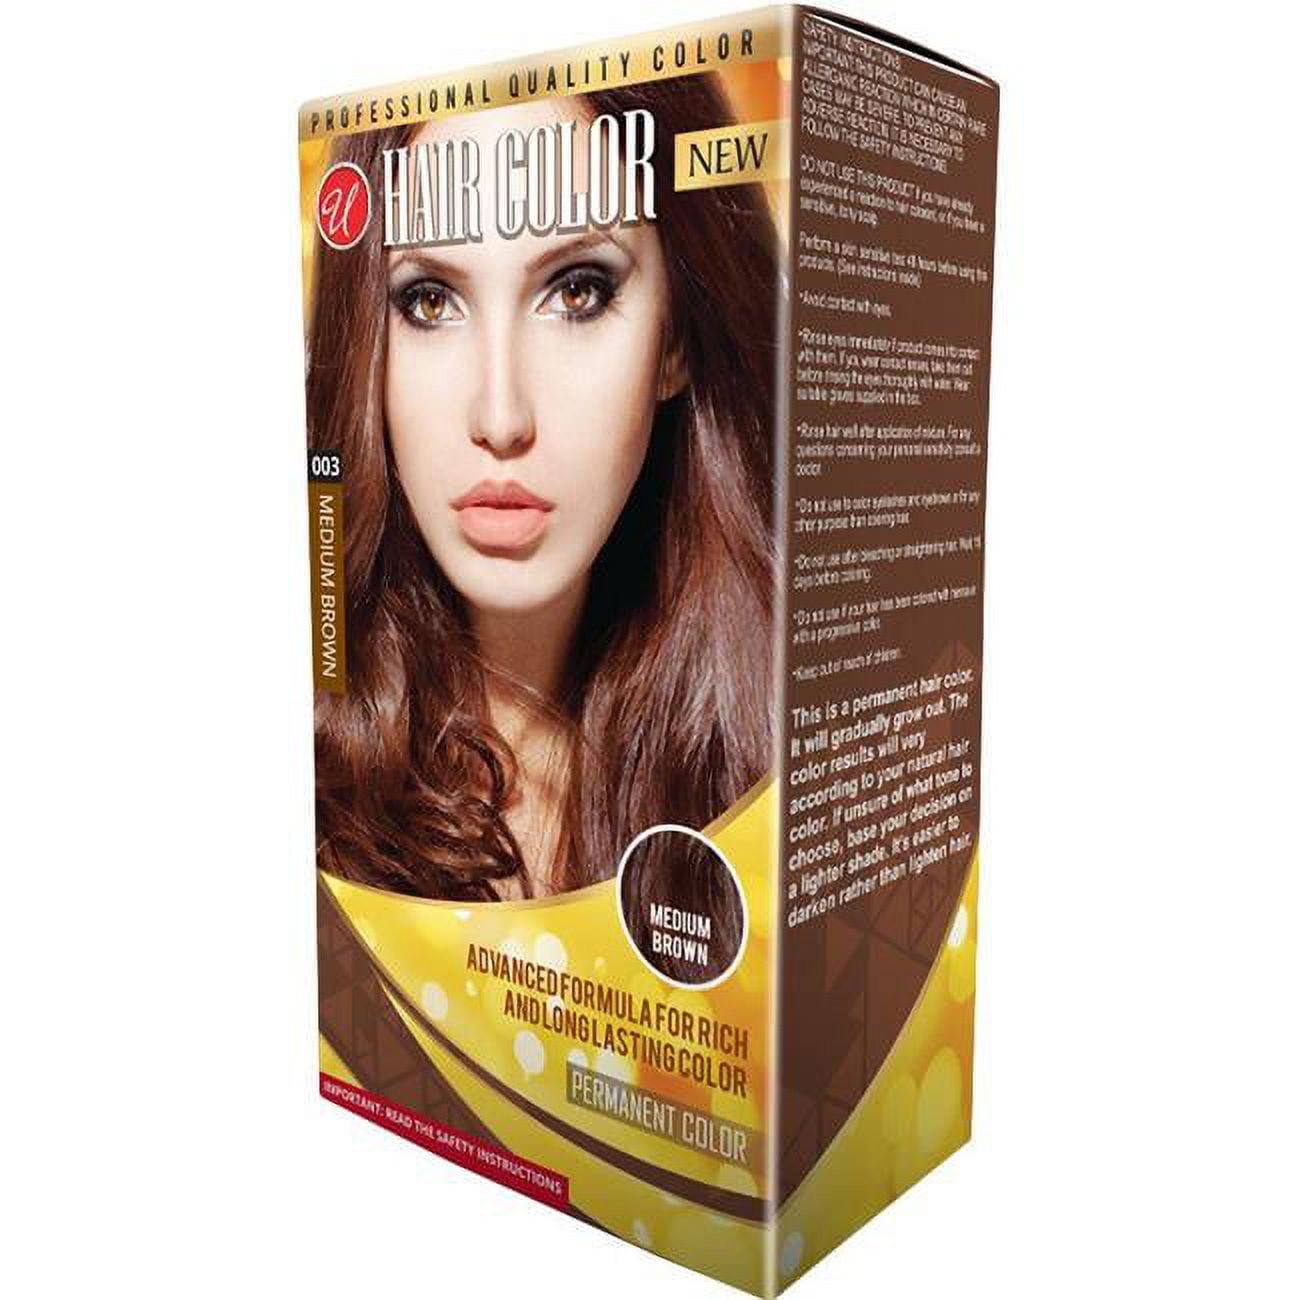 2288655 Womens Professional Quality Hair Color, Medium Brown - Case Of 48 - 48 Per Pack